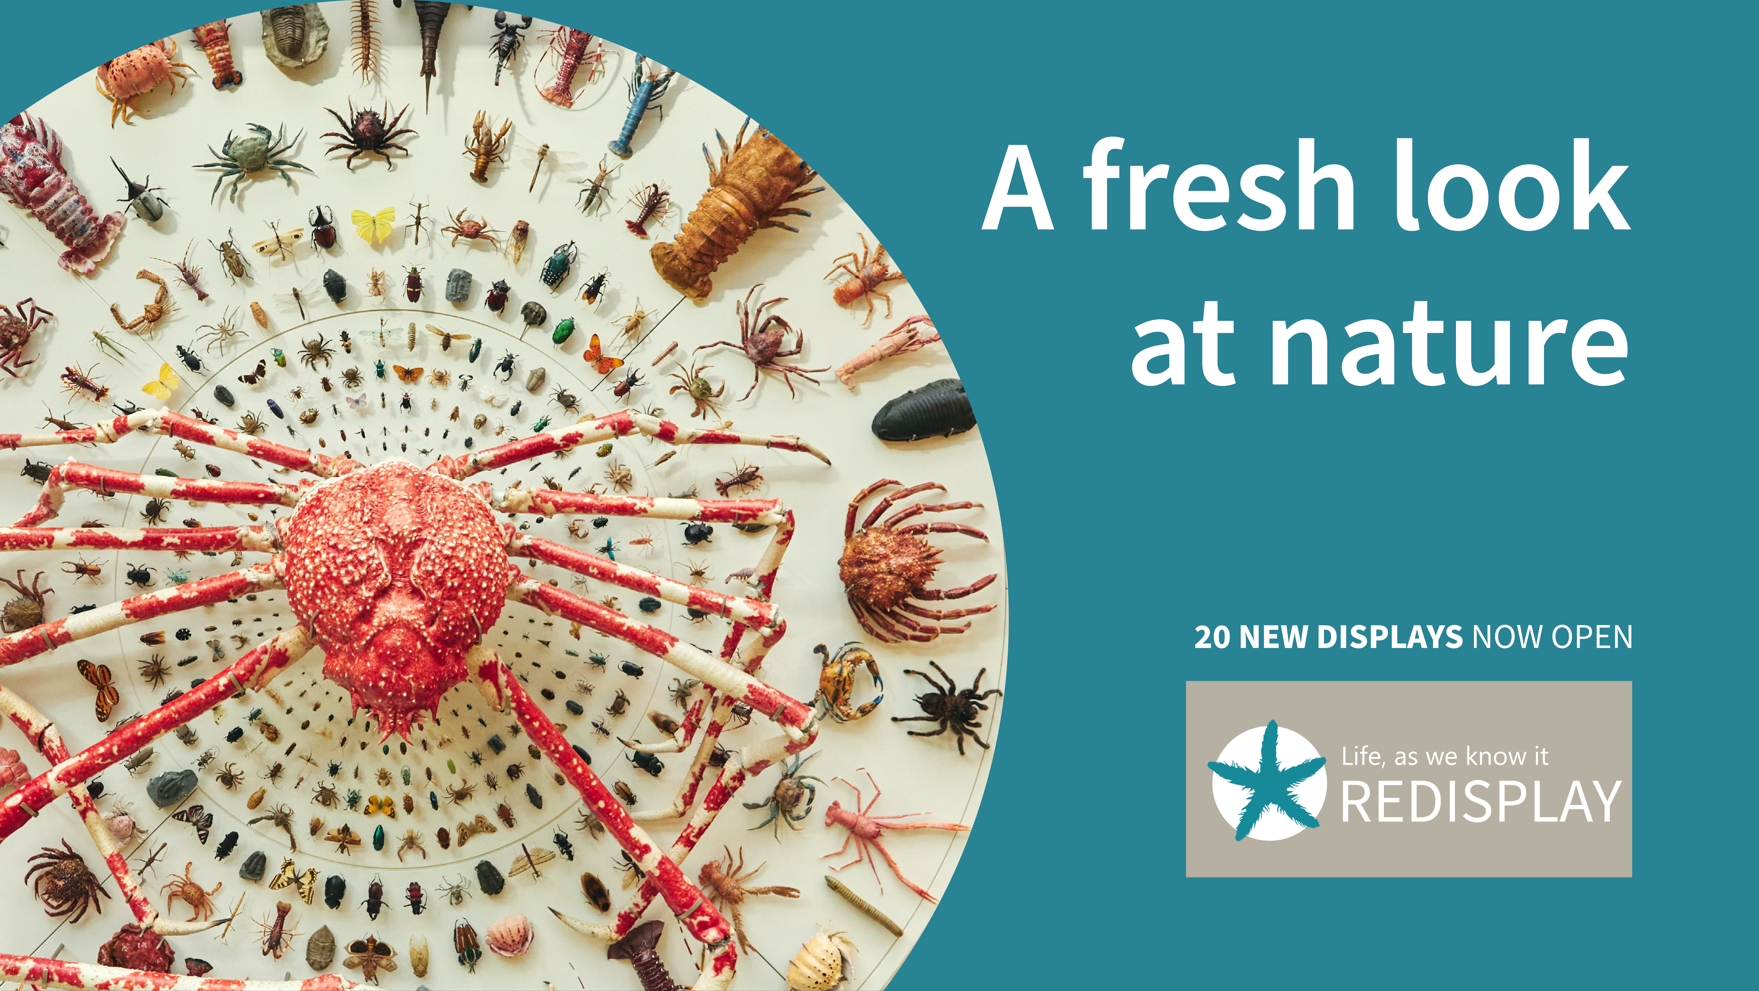 A fresh look at nature with Life as we know it. 20 new displays now open.